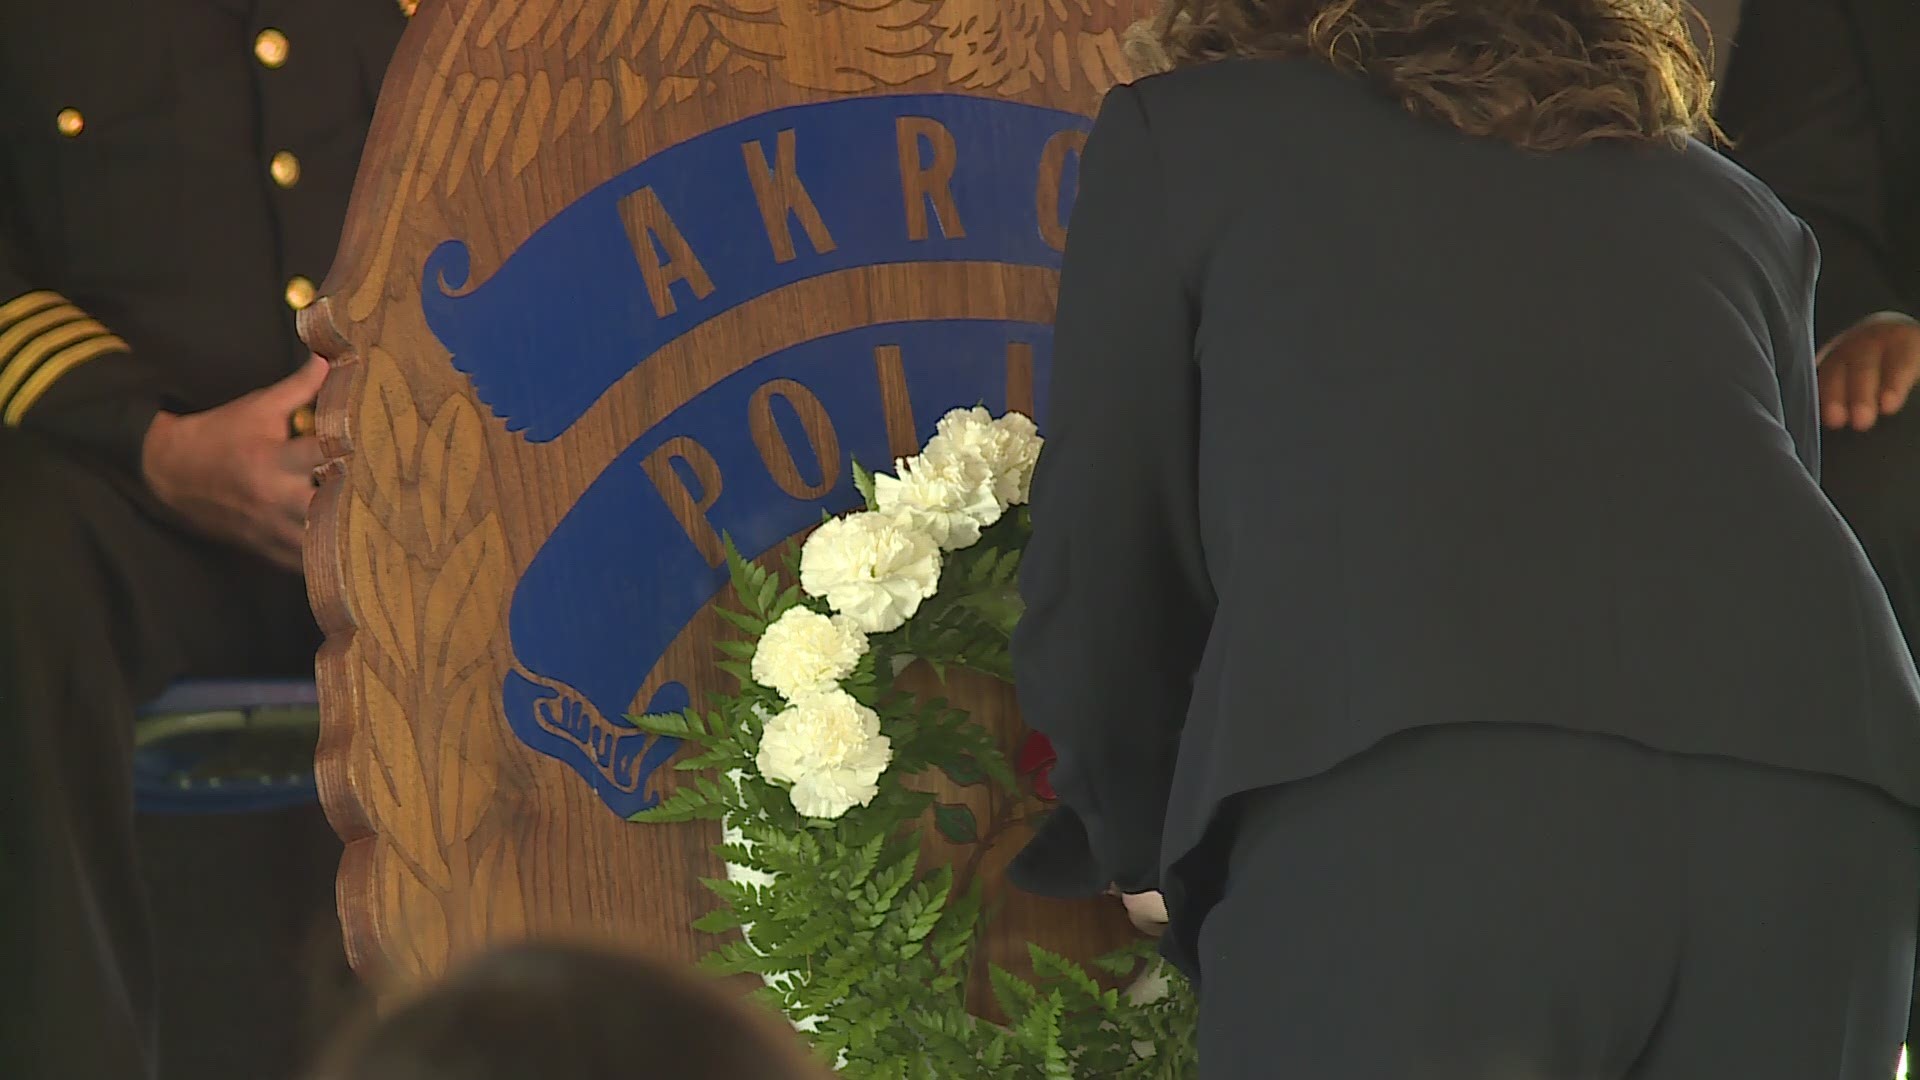 Akron police and community members honored 26 fallen officers at a memorial at the Akron FOP lodge late Wednesday morning.